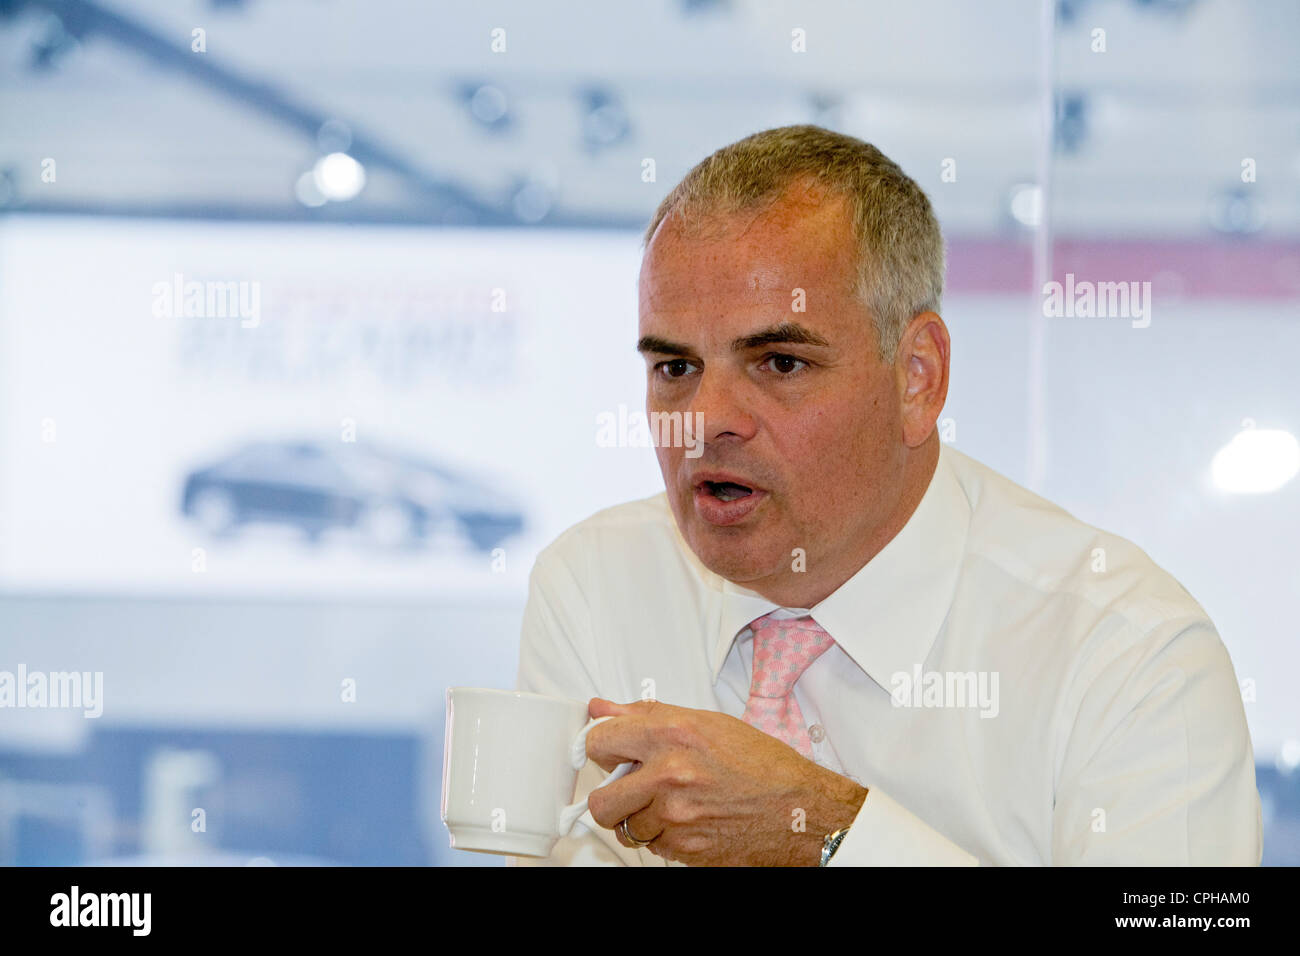 Detroit, Michigan - Stefan Jacoby, president and CEO of Volvo, at the North American International Auto Show. Stock Photo